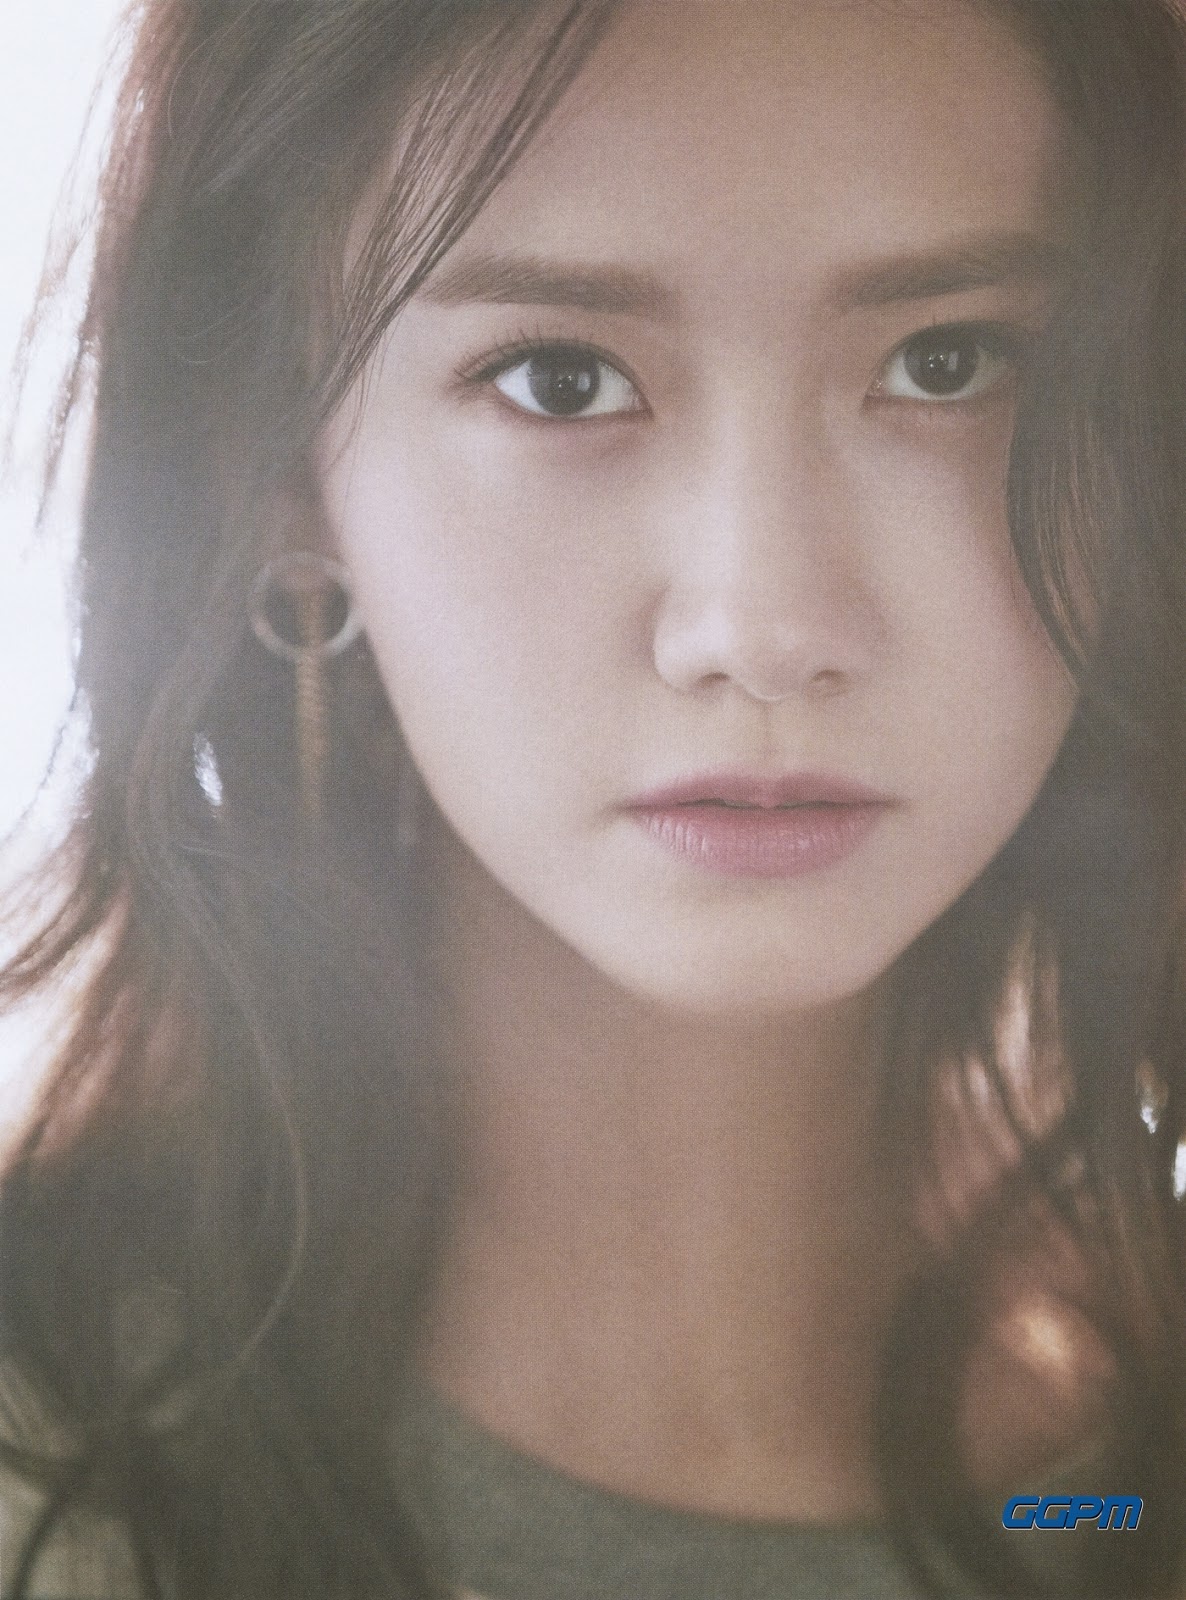 SNSD YoonA for ALLURE's September issue - Wonderful Generation